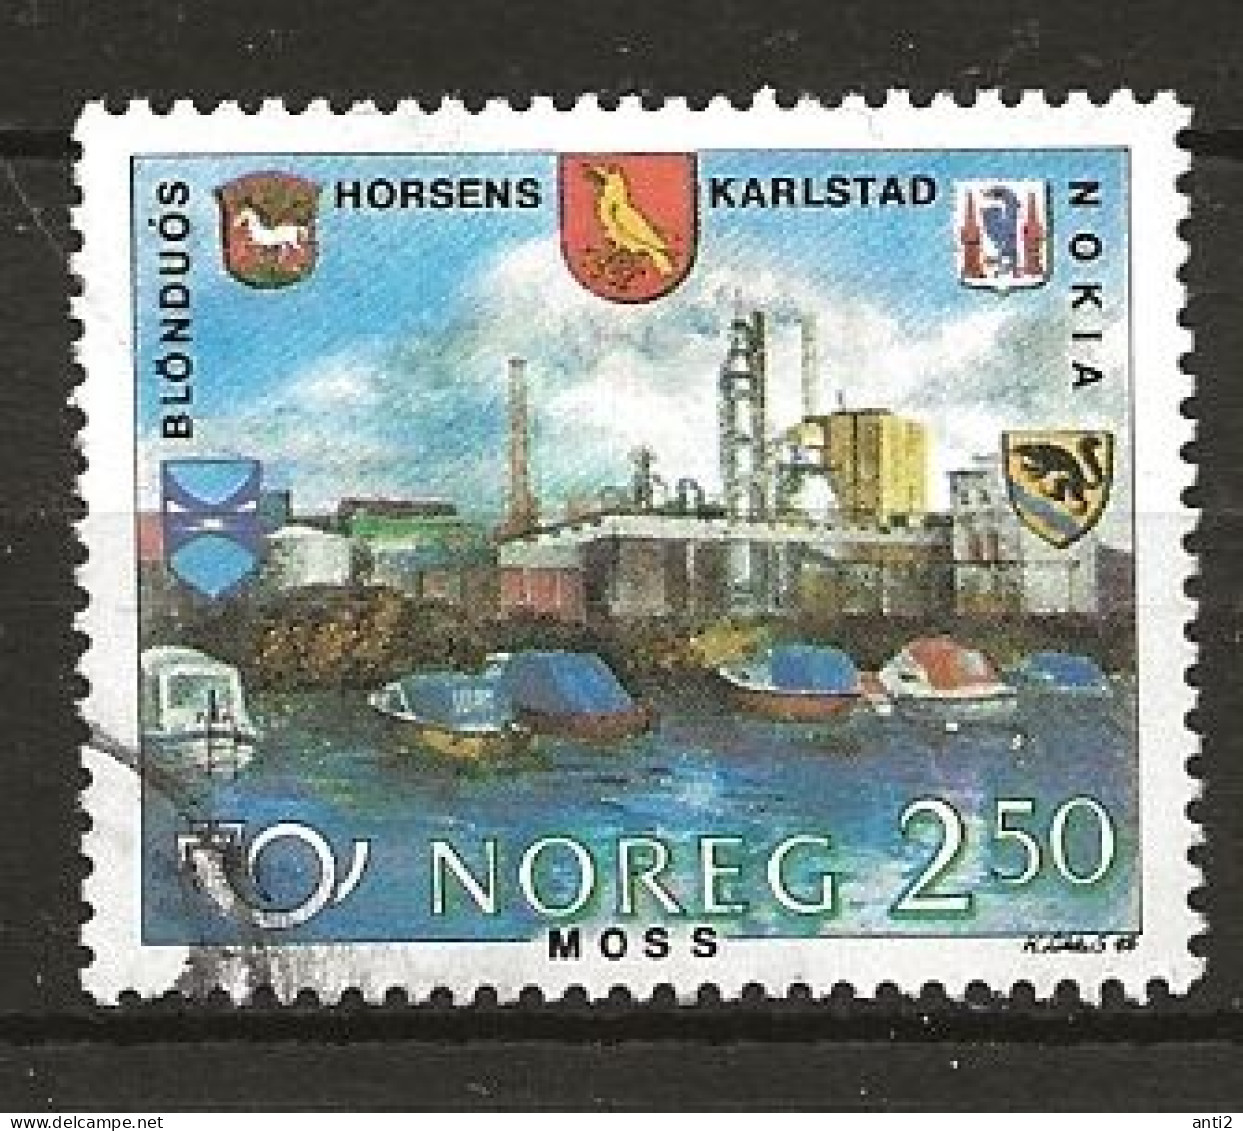 Norway 1986 NORTH: Twin Cities In Scandinavia, Moss, Blonduos, Horsens, Karlstad, Nokia, Mi 948, Cancelled(o) - Used Stamps